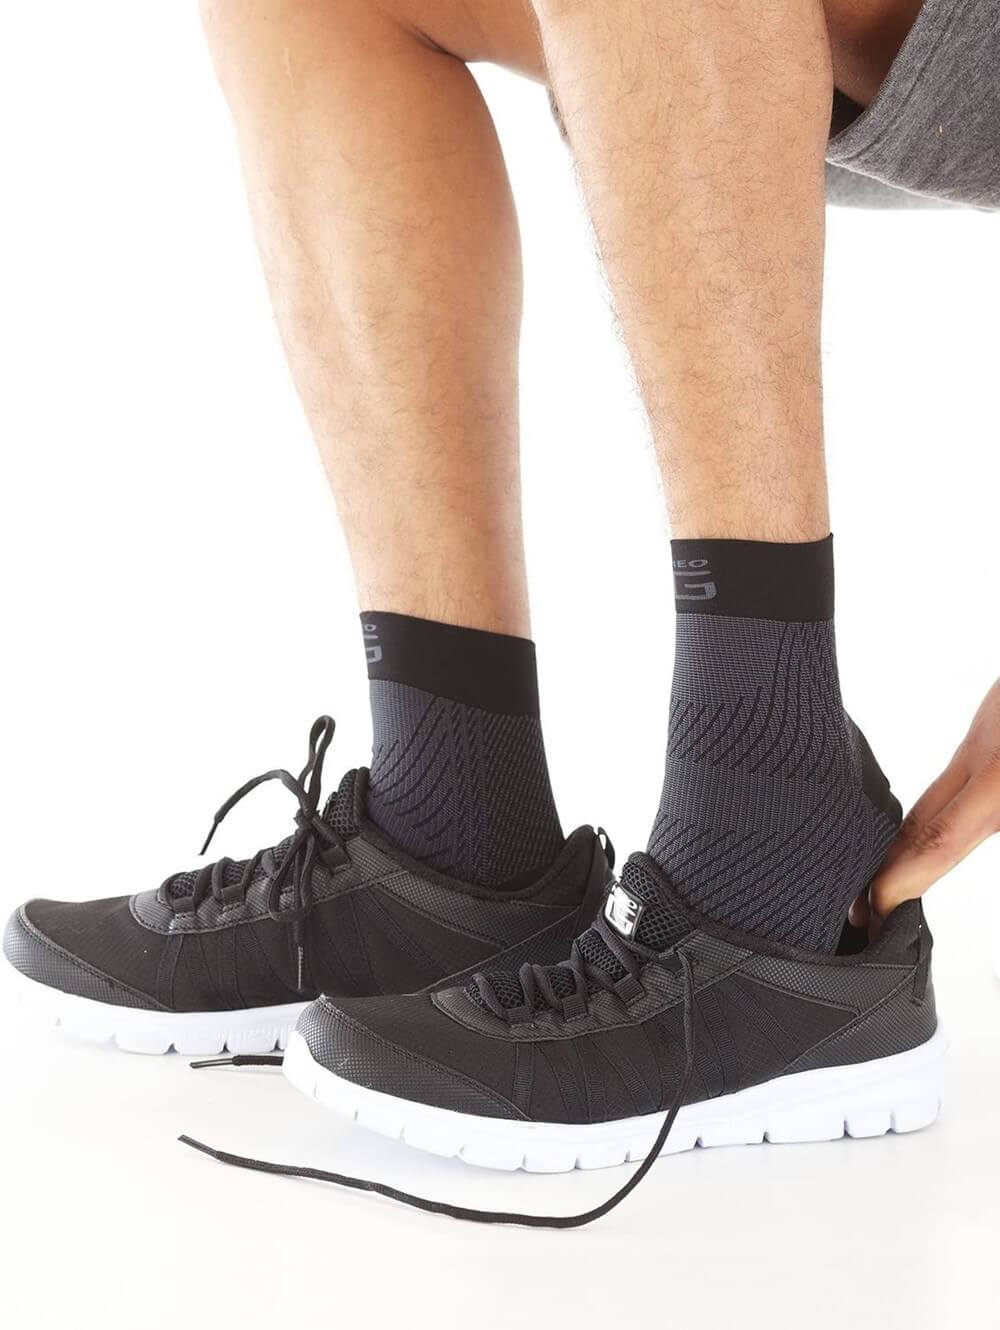 foot compression arch pain socks